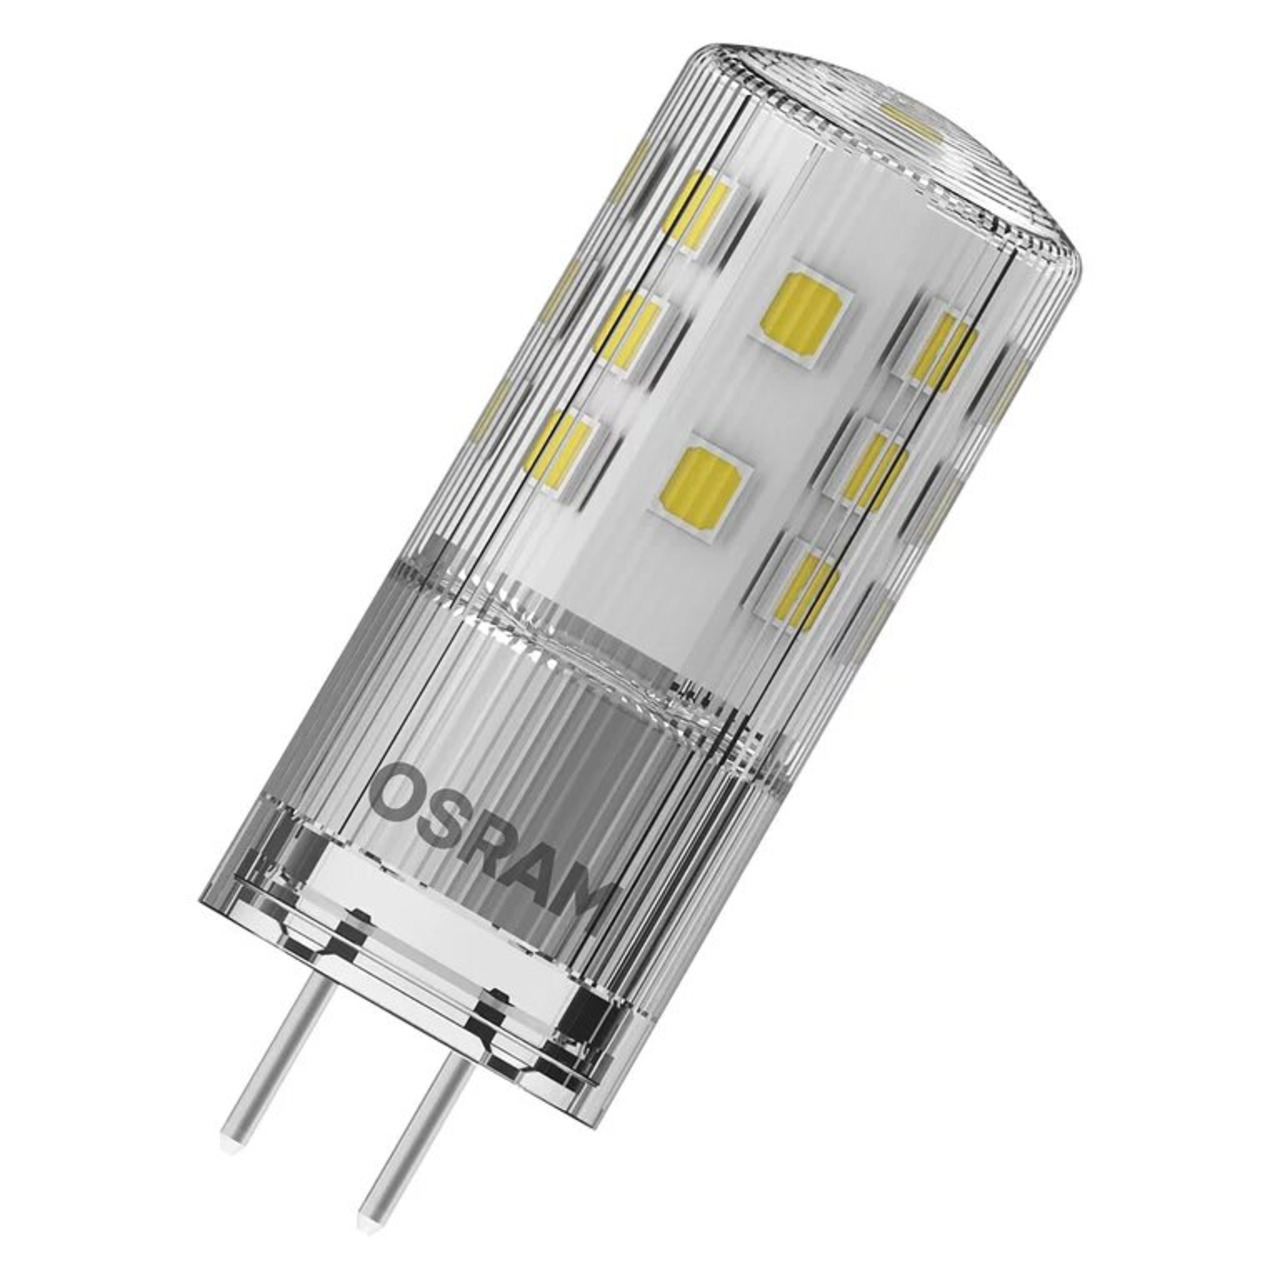 OSRAM 4-W-LED-Lampe T18- GY6-35- 470 lm- warmweiss- 320- 12 V unter Beleuchtung